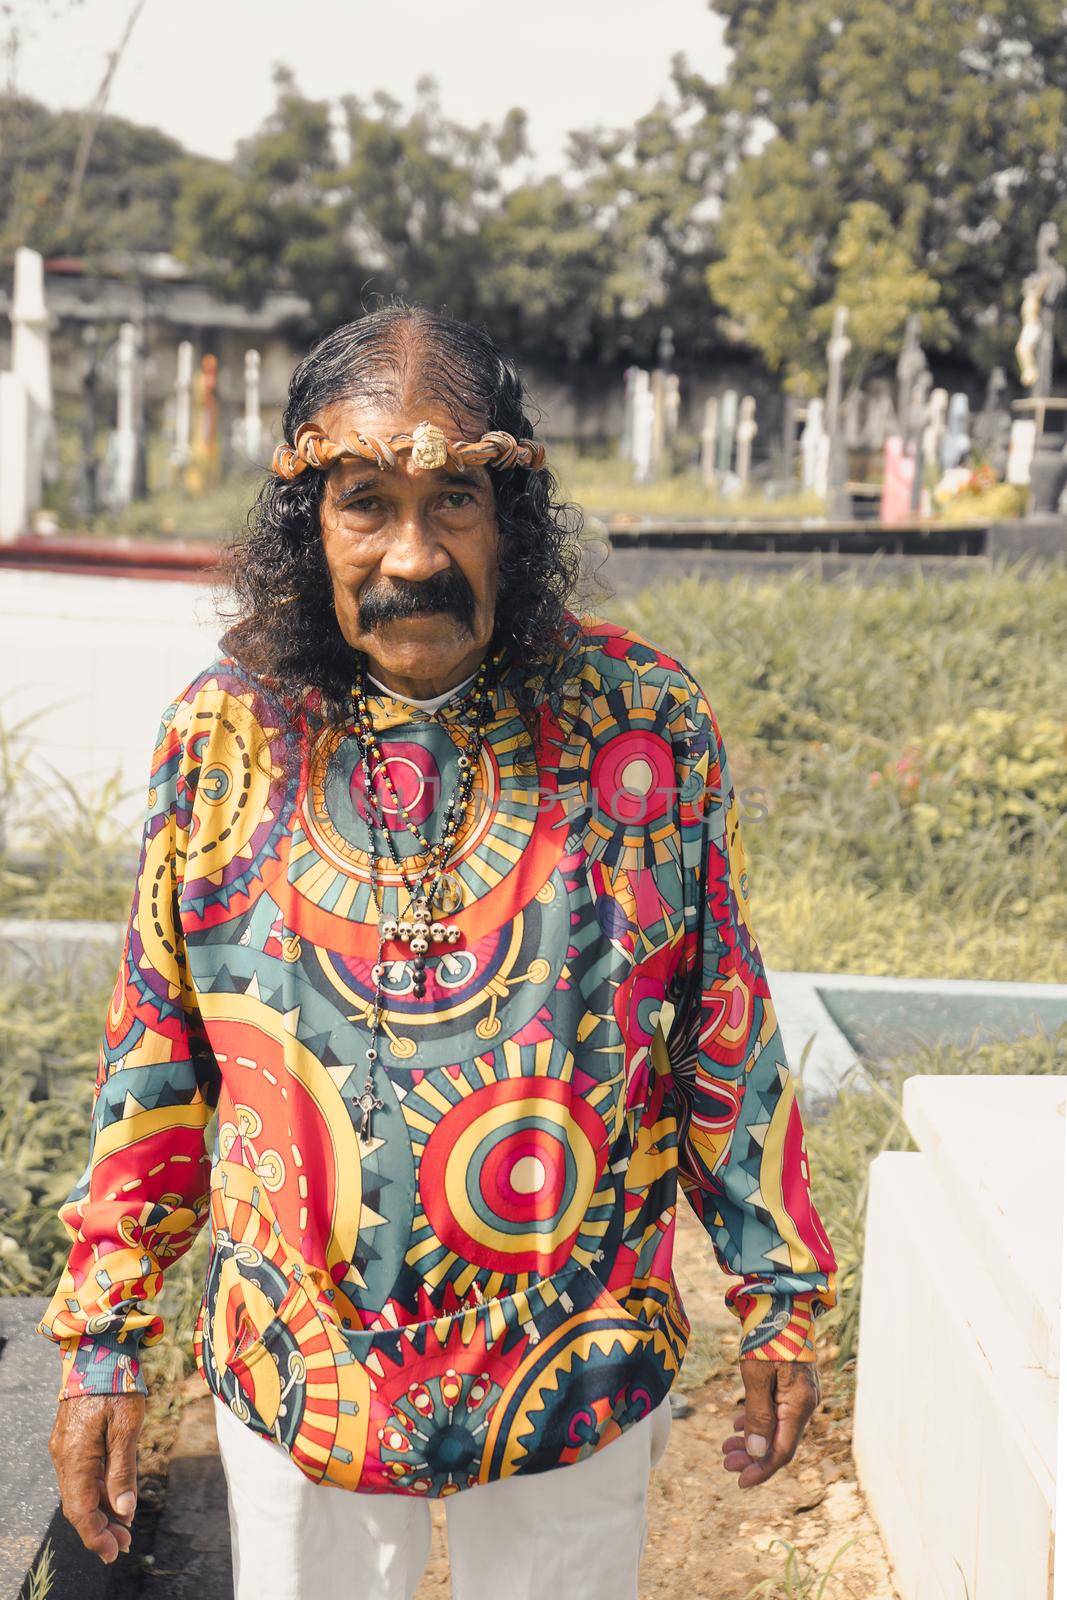 Impersonator of Jesus Christ with psychedelic clothes in a cemetery in Managua Nicaragua